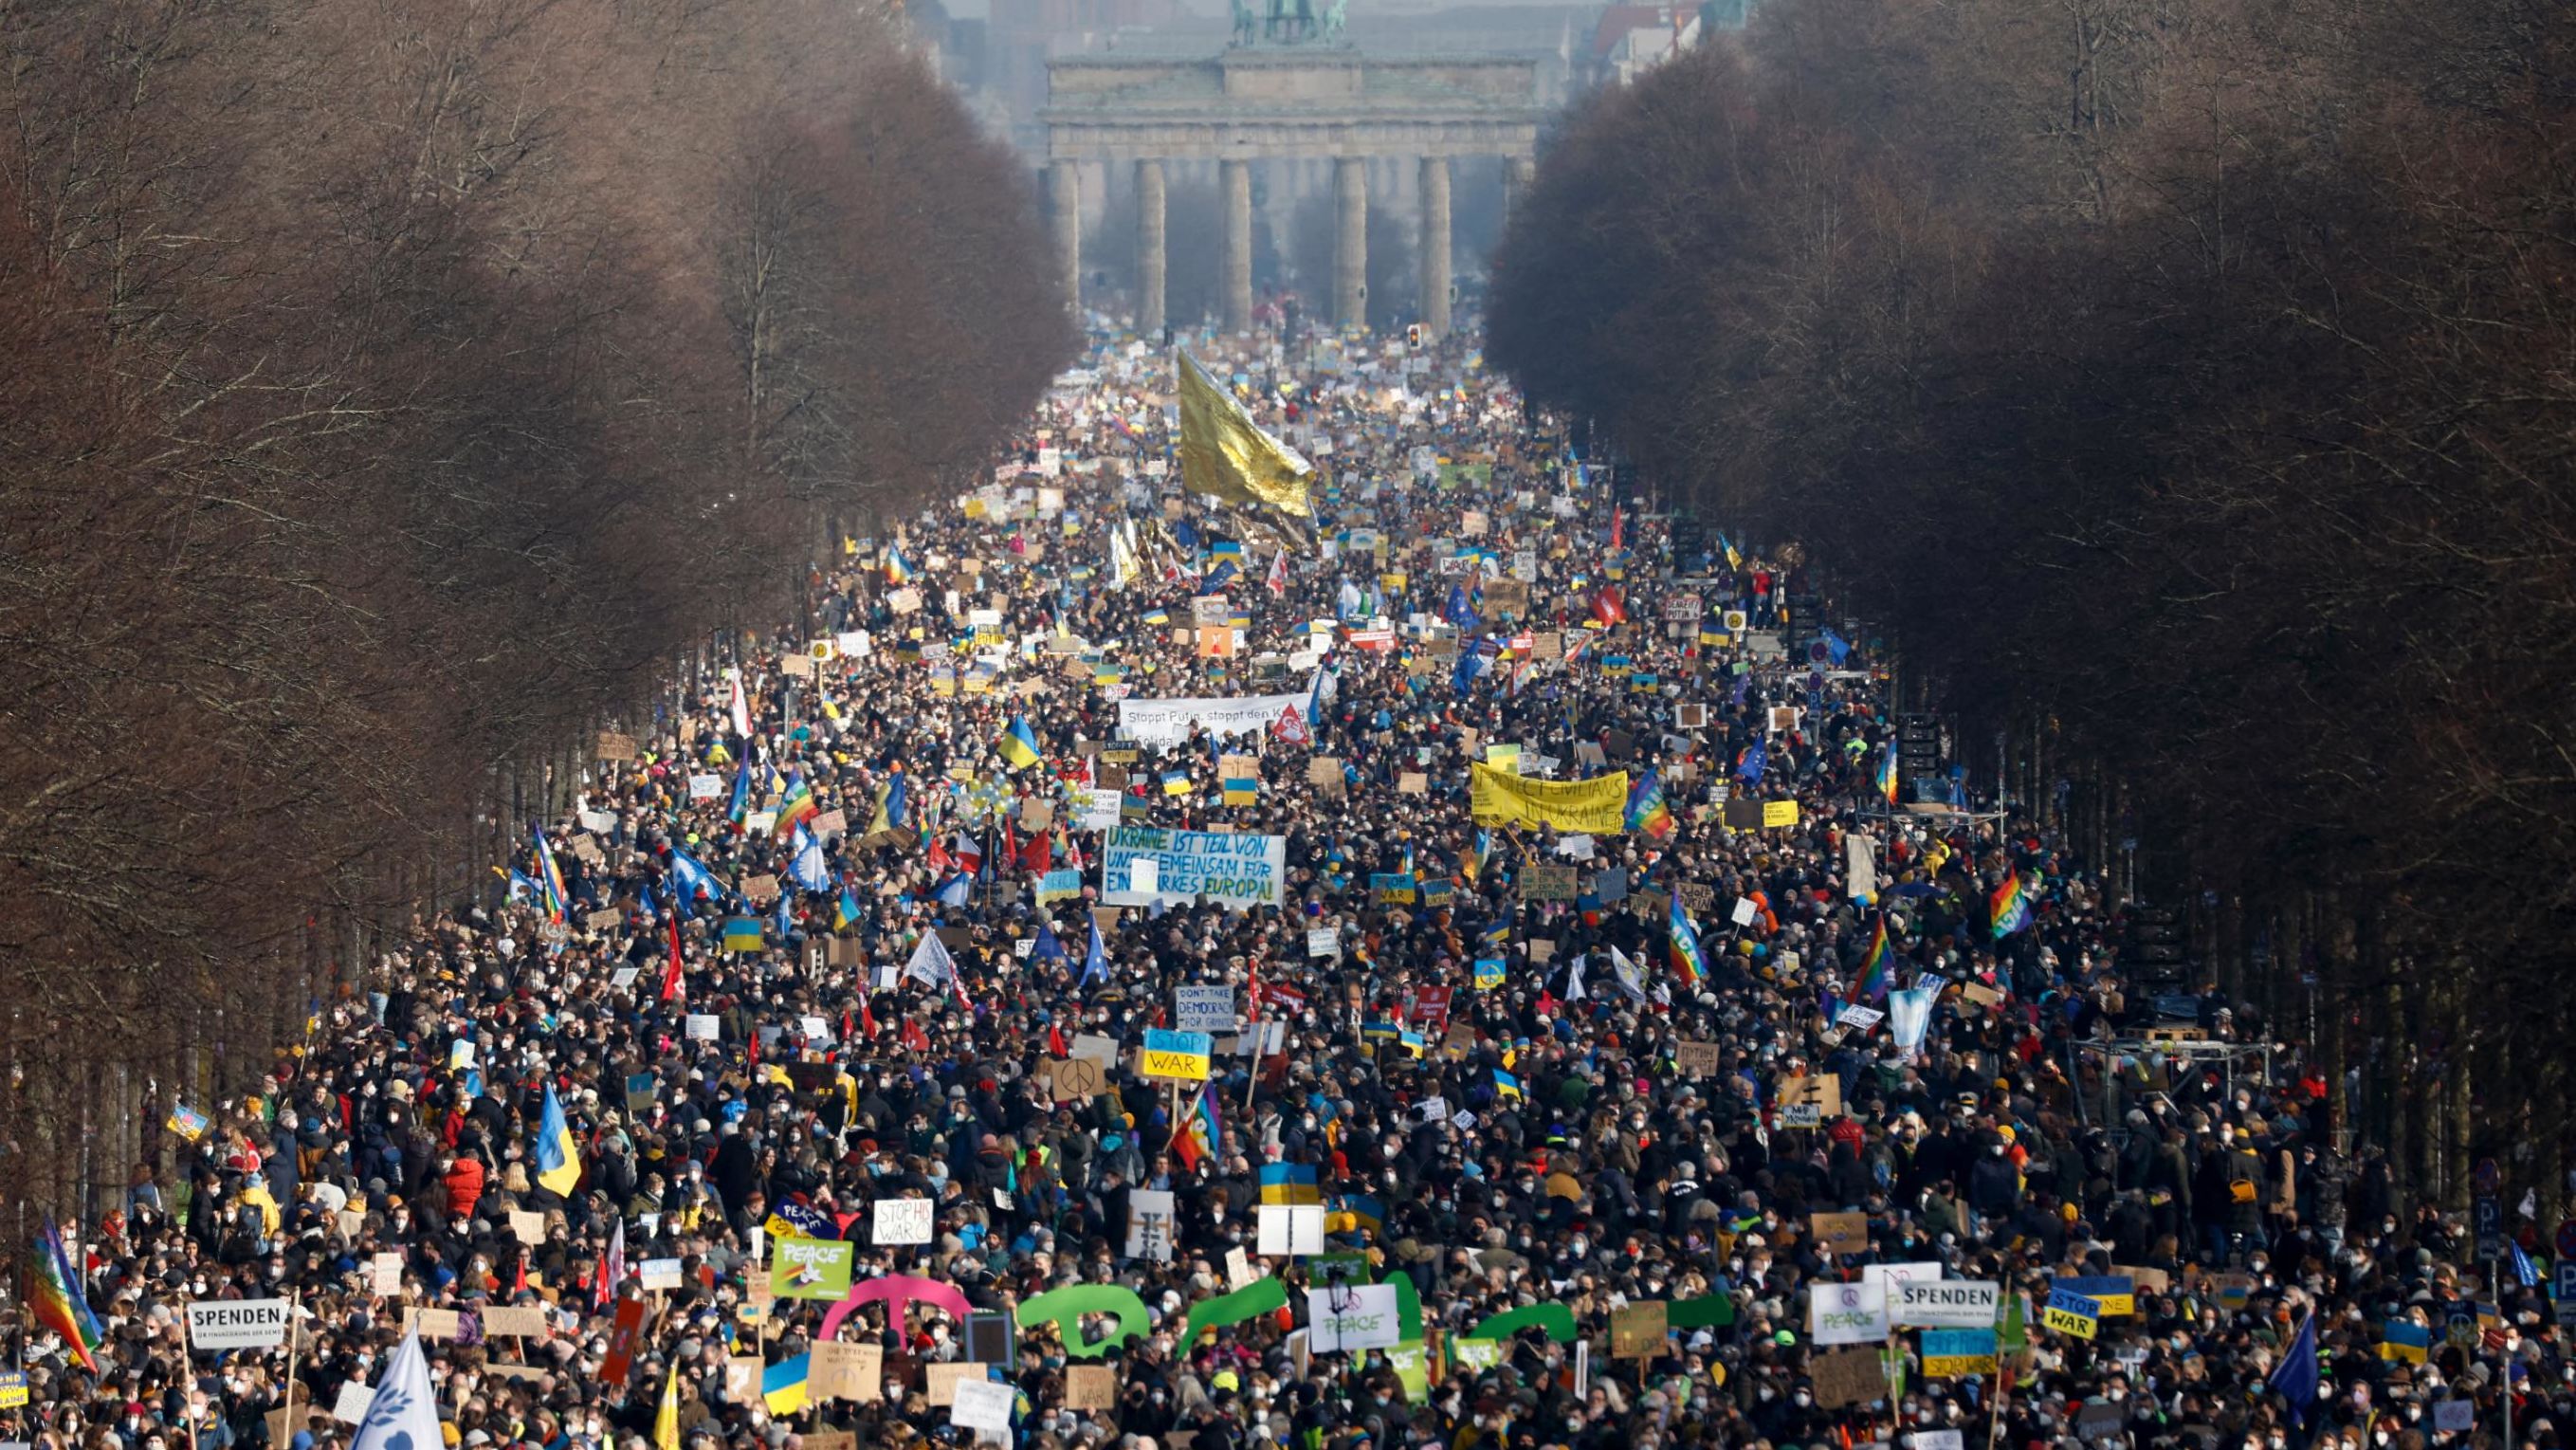 Thousands of protesters gather in Berlin's Tiergarten park on February 27.